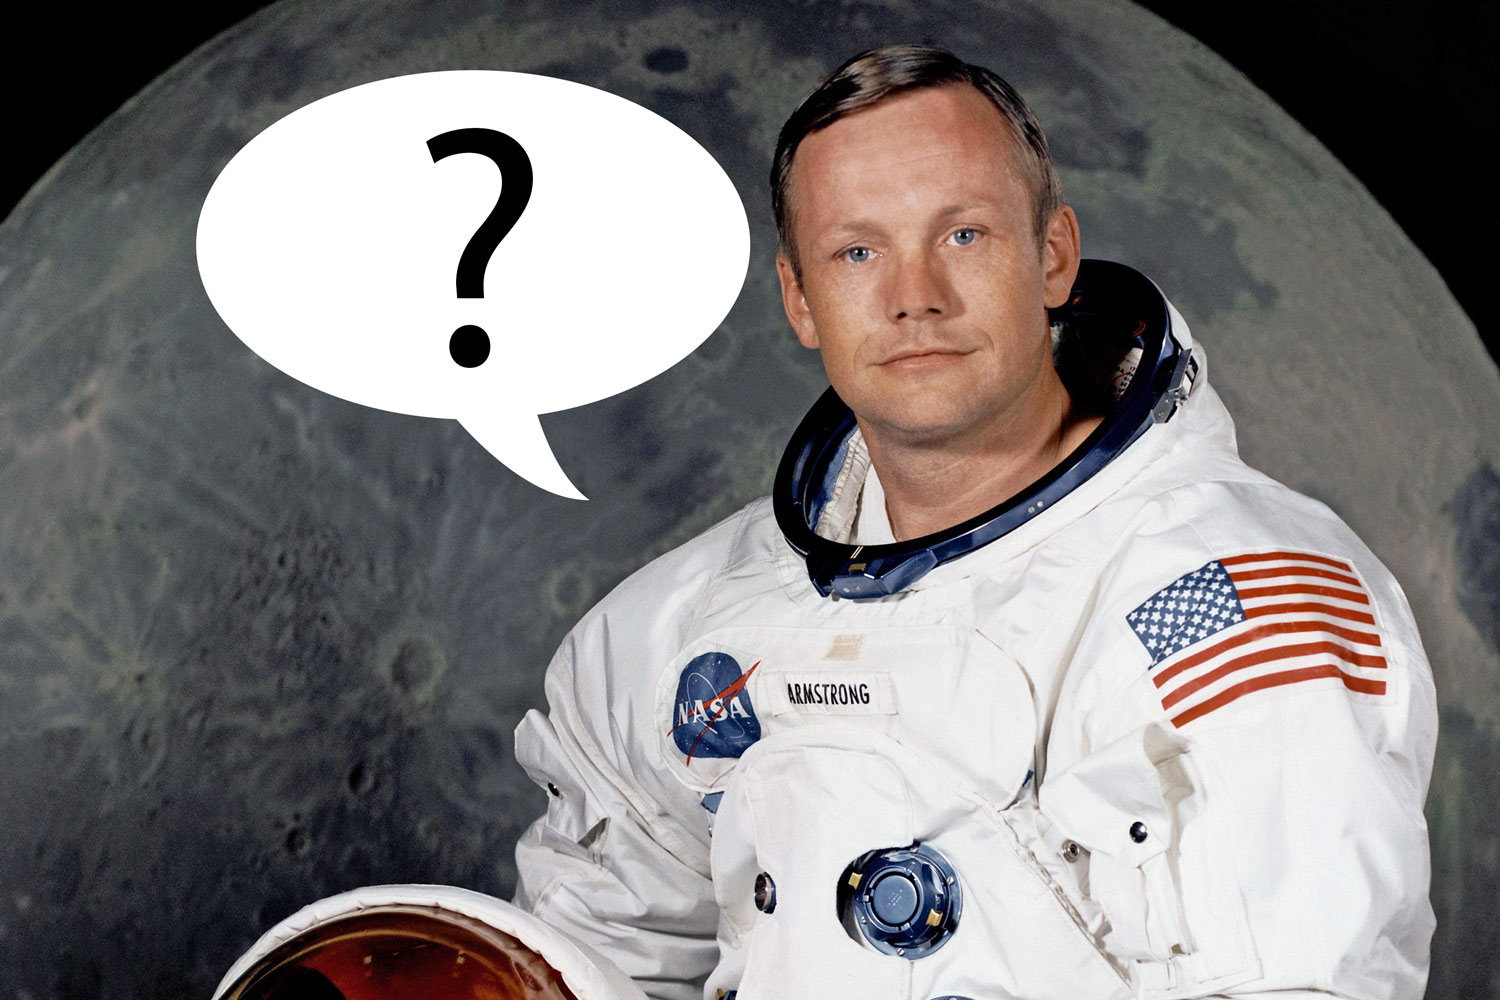 Did we mishear Neil Armstrong’s famous first words on the Moon?